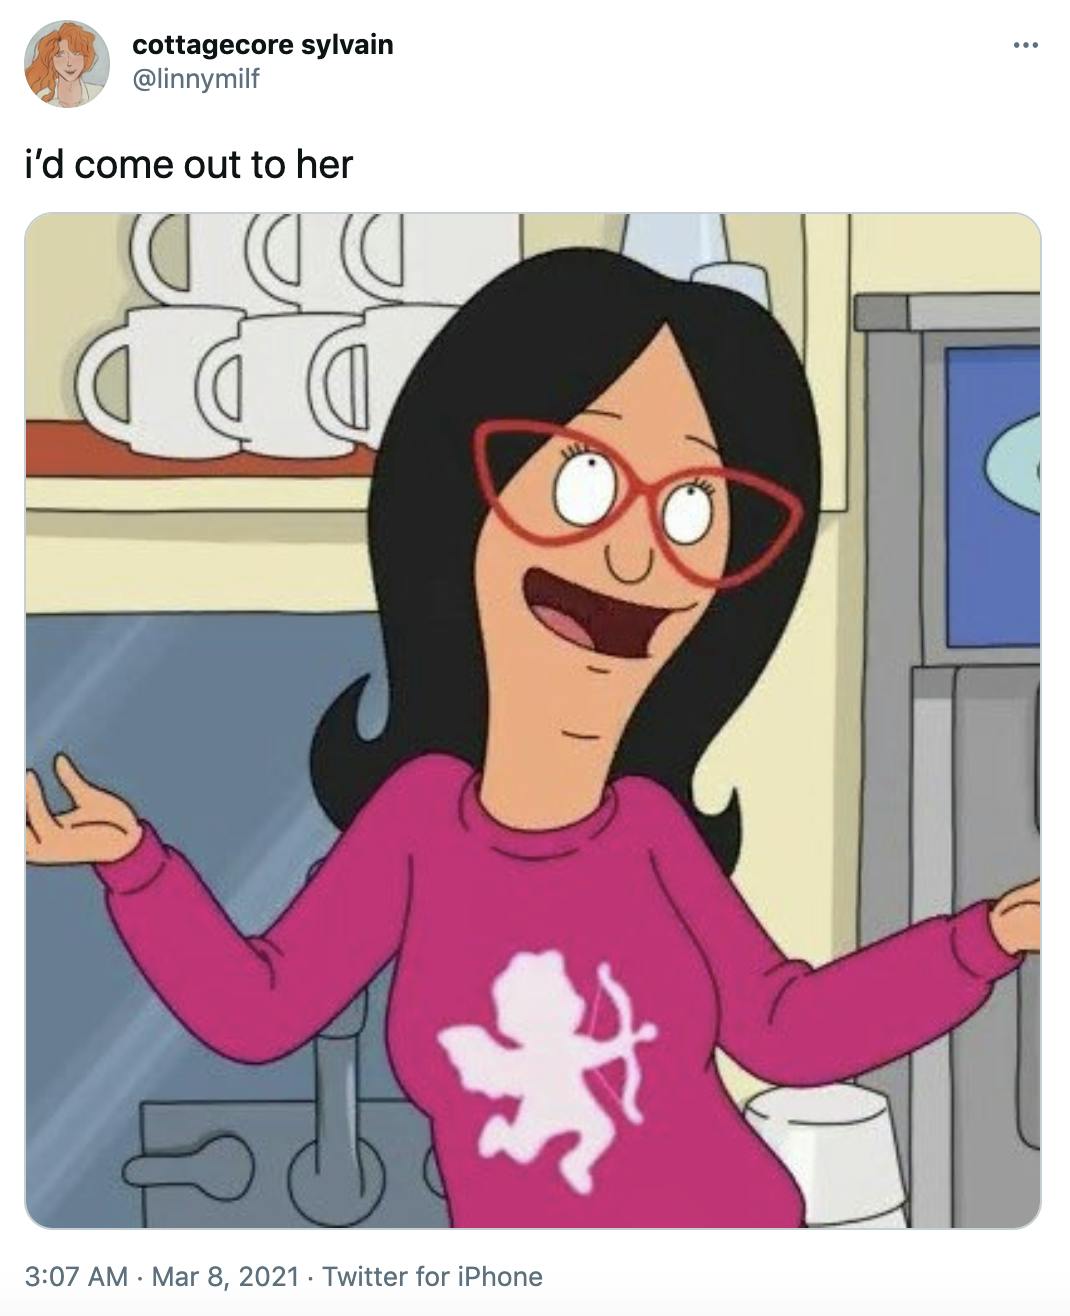 'i’d come out to her' Linda from Bob's Burger's, a cartoon white woman with black hair and glasses, shrugs cheerfully while wearing a pink sweater.